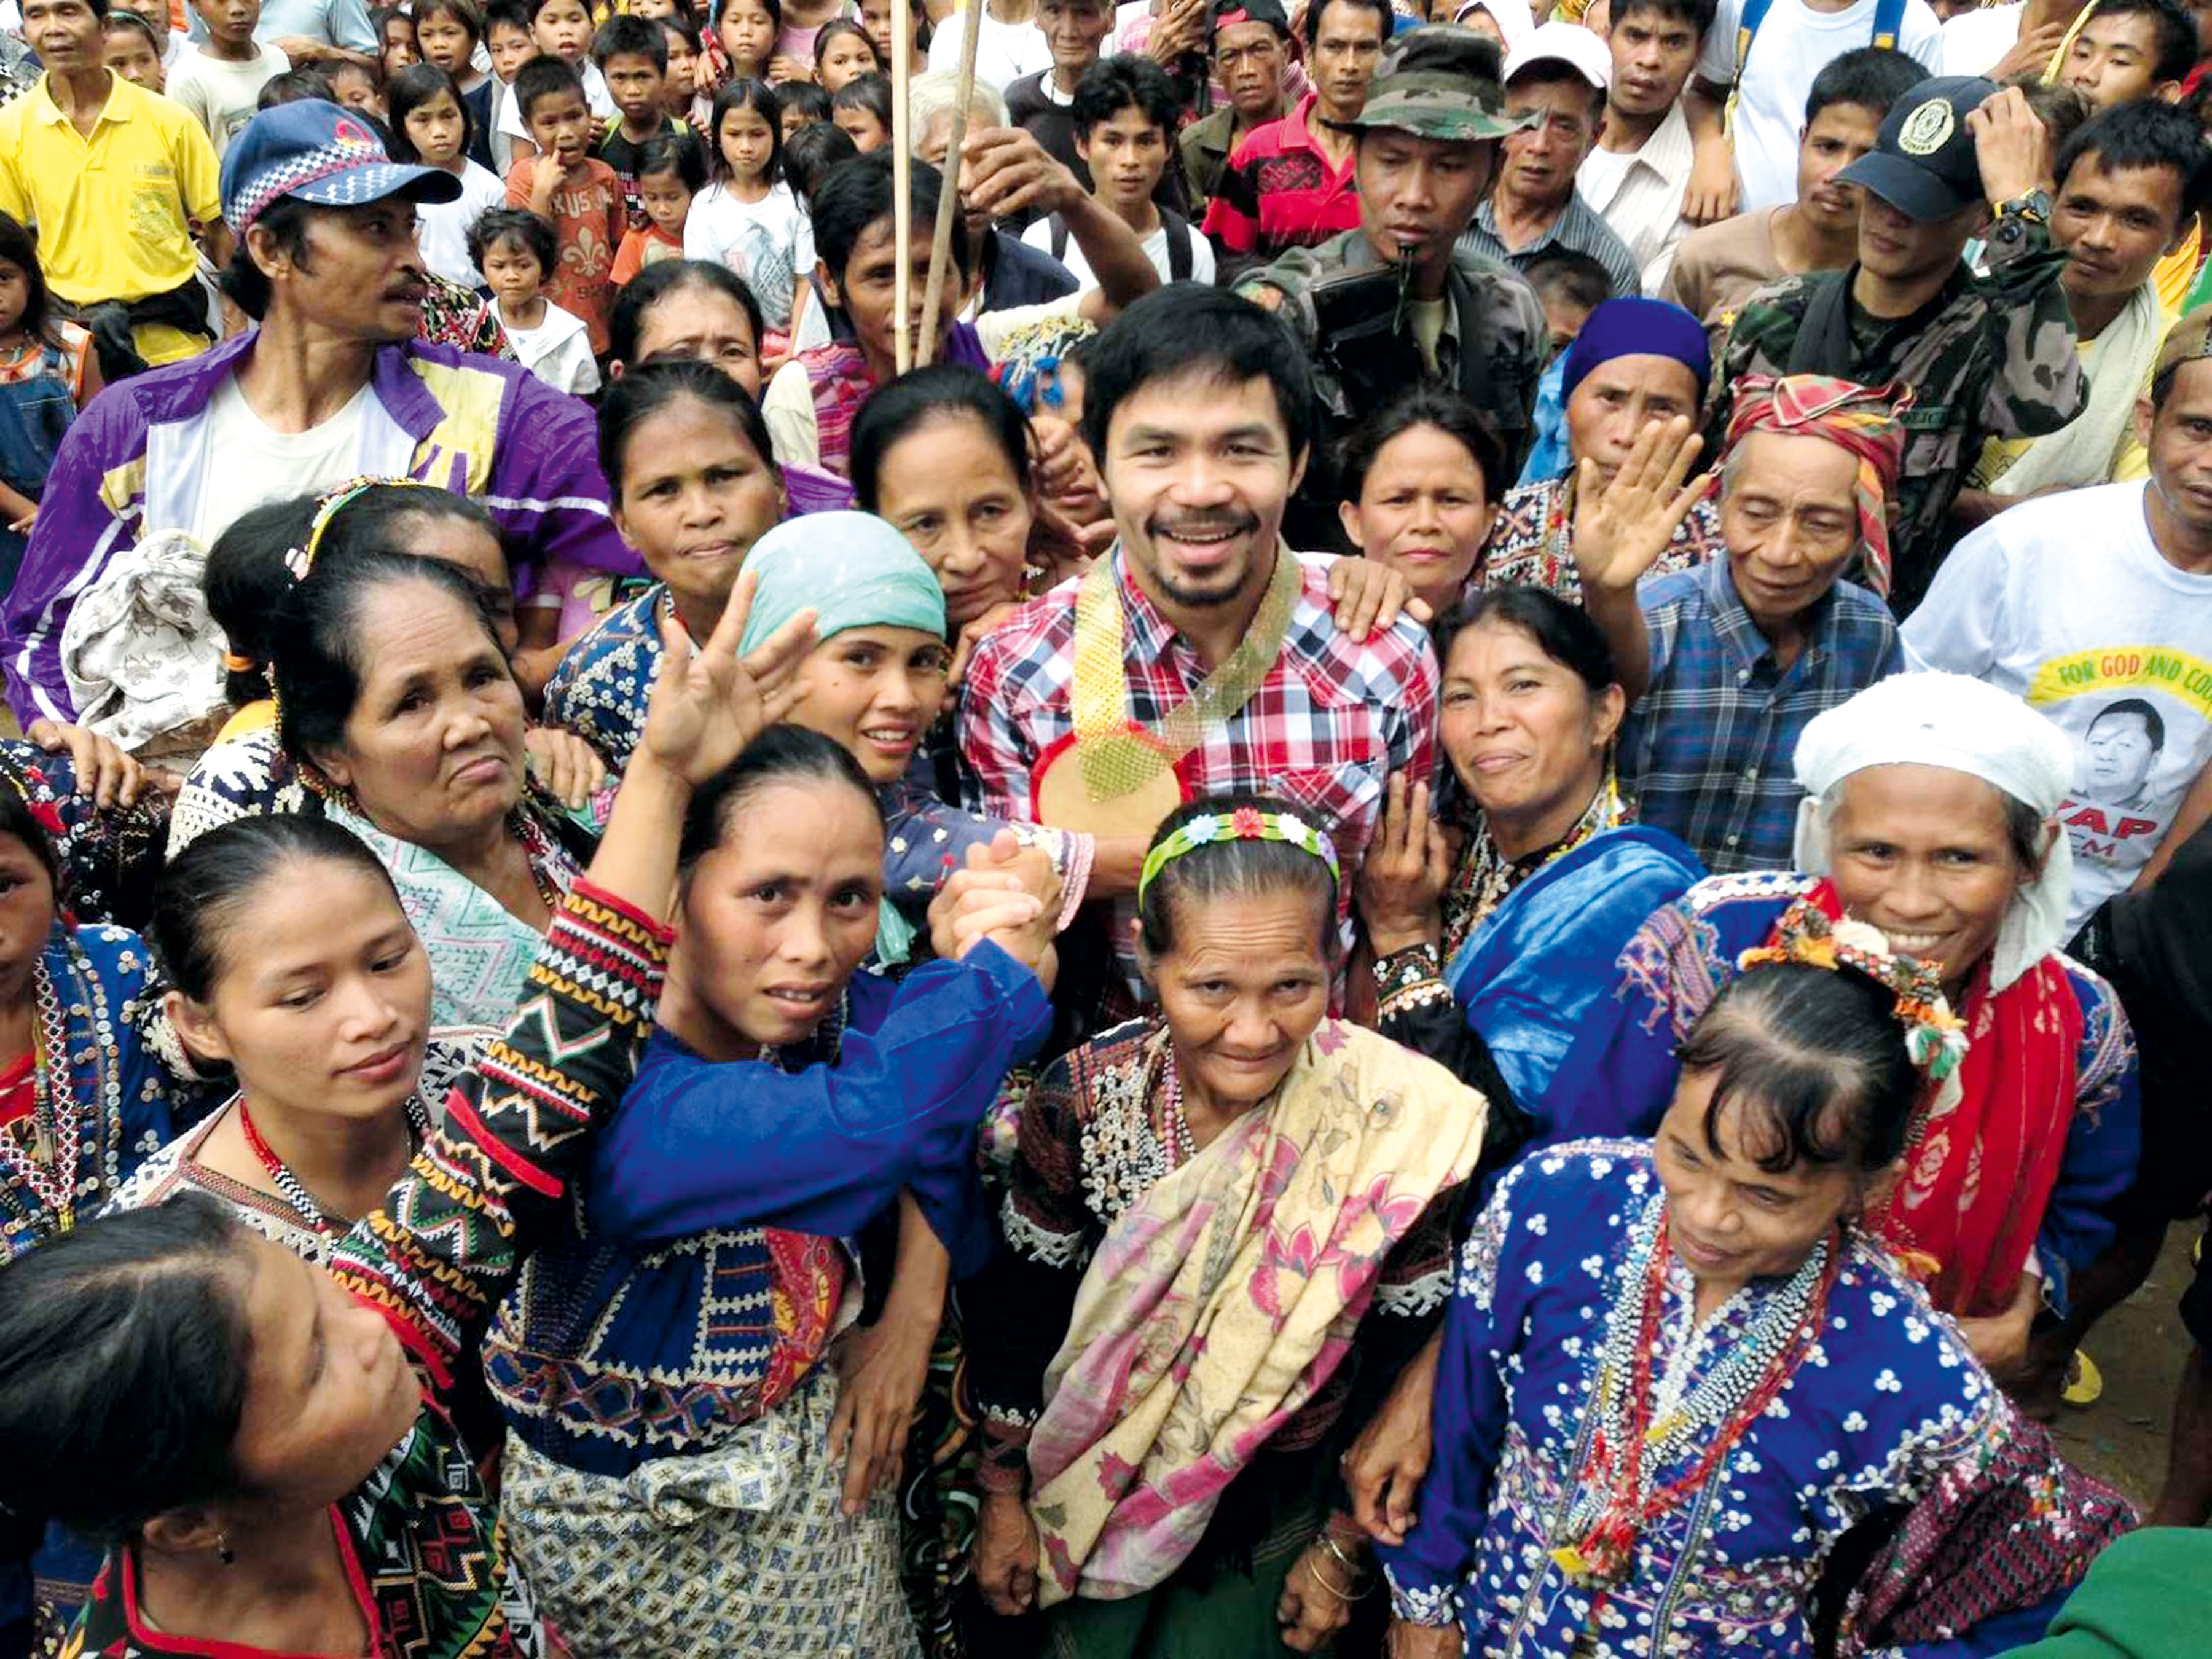 Manny Pacquiao: The People’s Champion